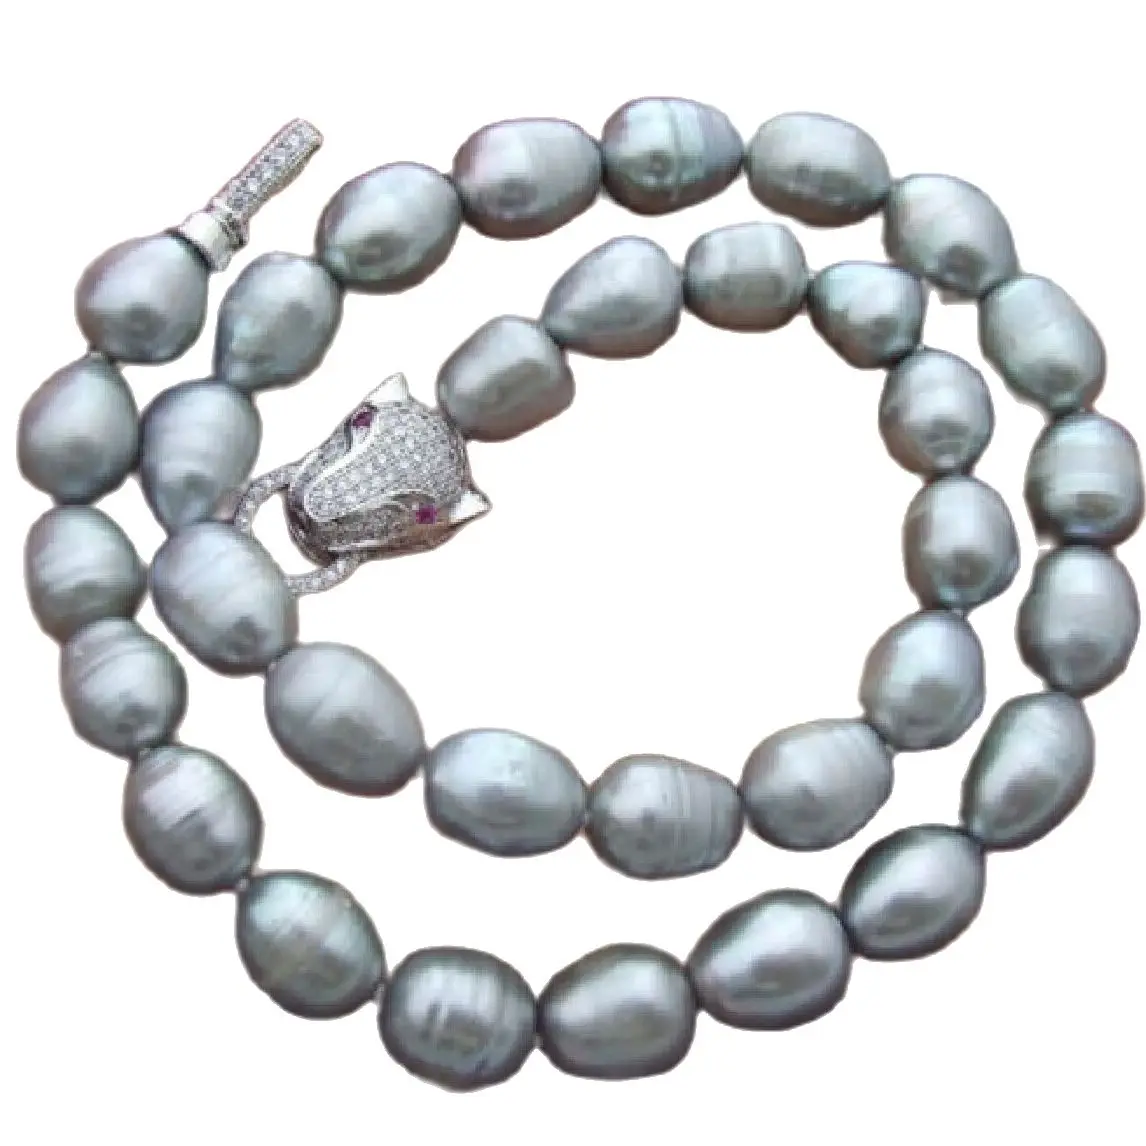 

STUNNING 11-12MM SOUTH SEA SILVER GREY PEARL NECKLACE 18 INCH